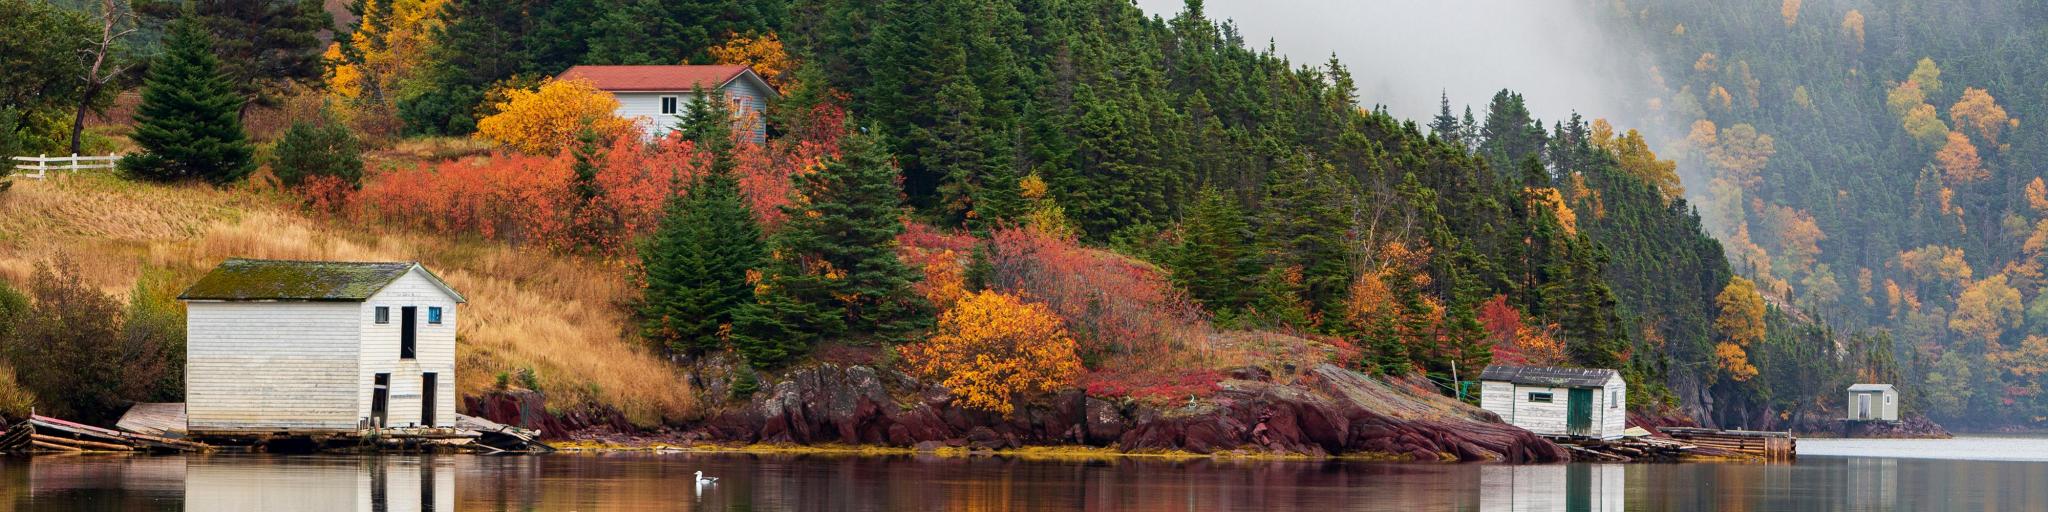 Tranquil autumn morning in Trinity Bay, Newfoundland and Labrador, Canada.